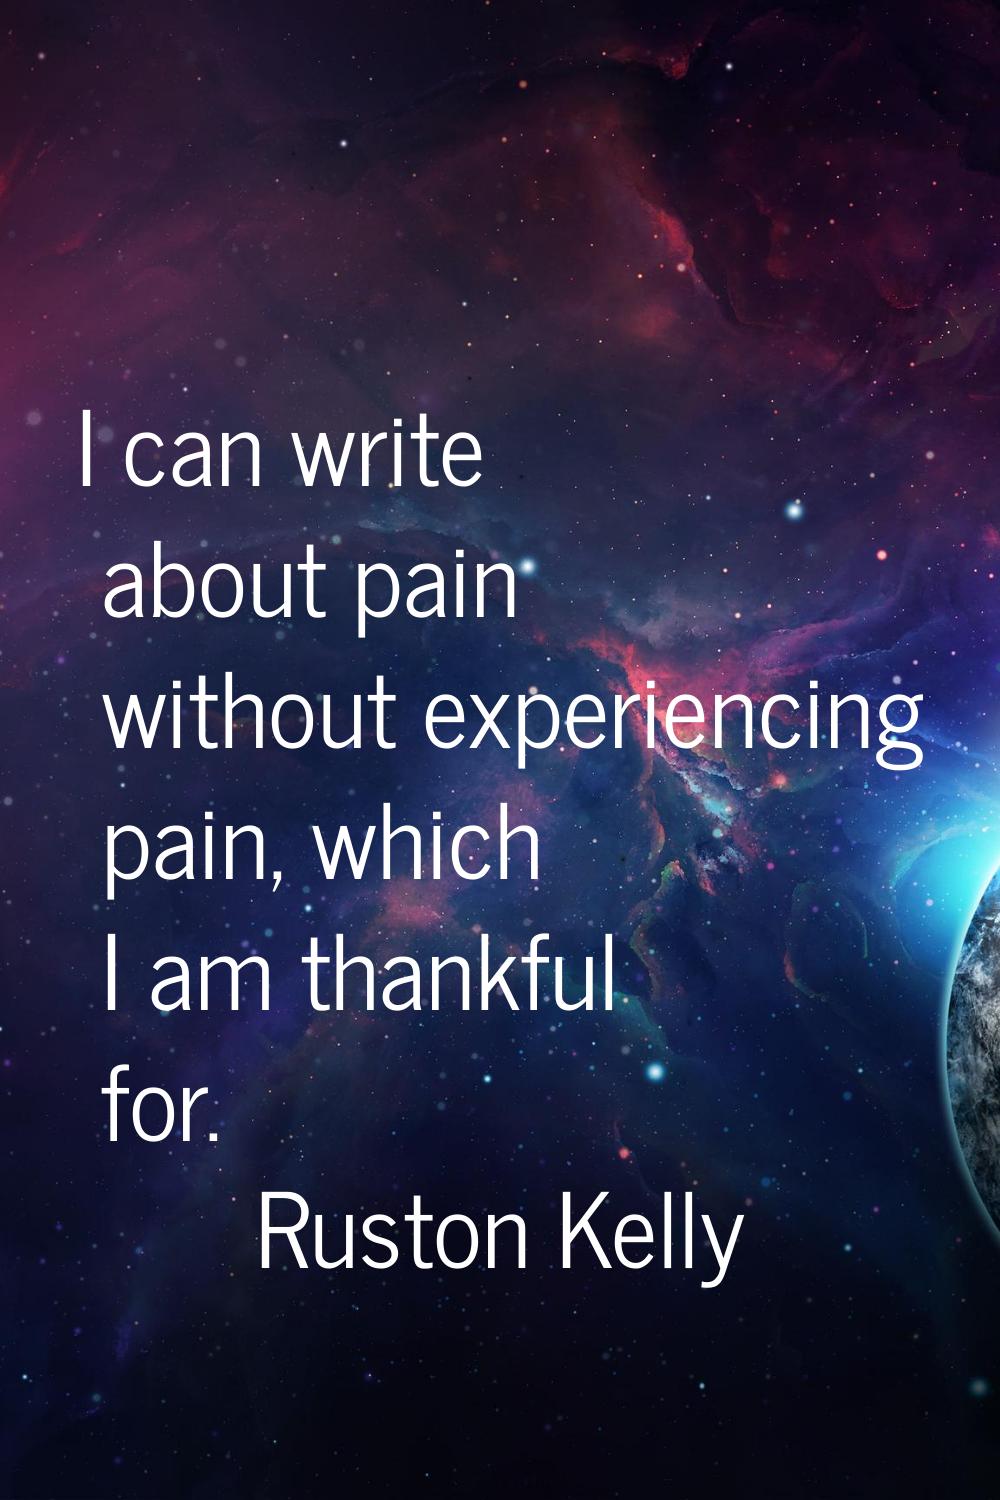 I can write about pain without experiencing pain, which I am thankful for.